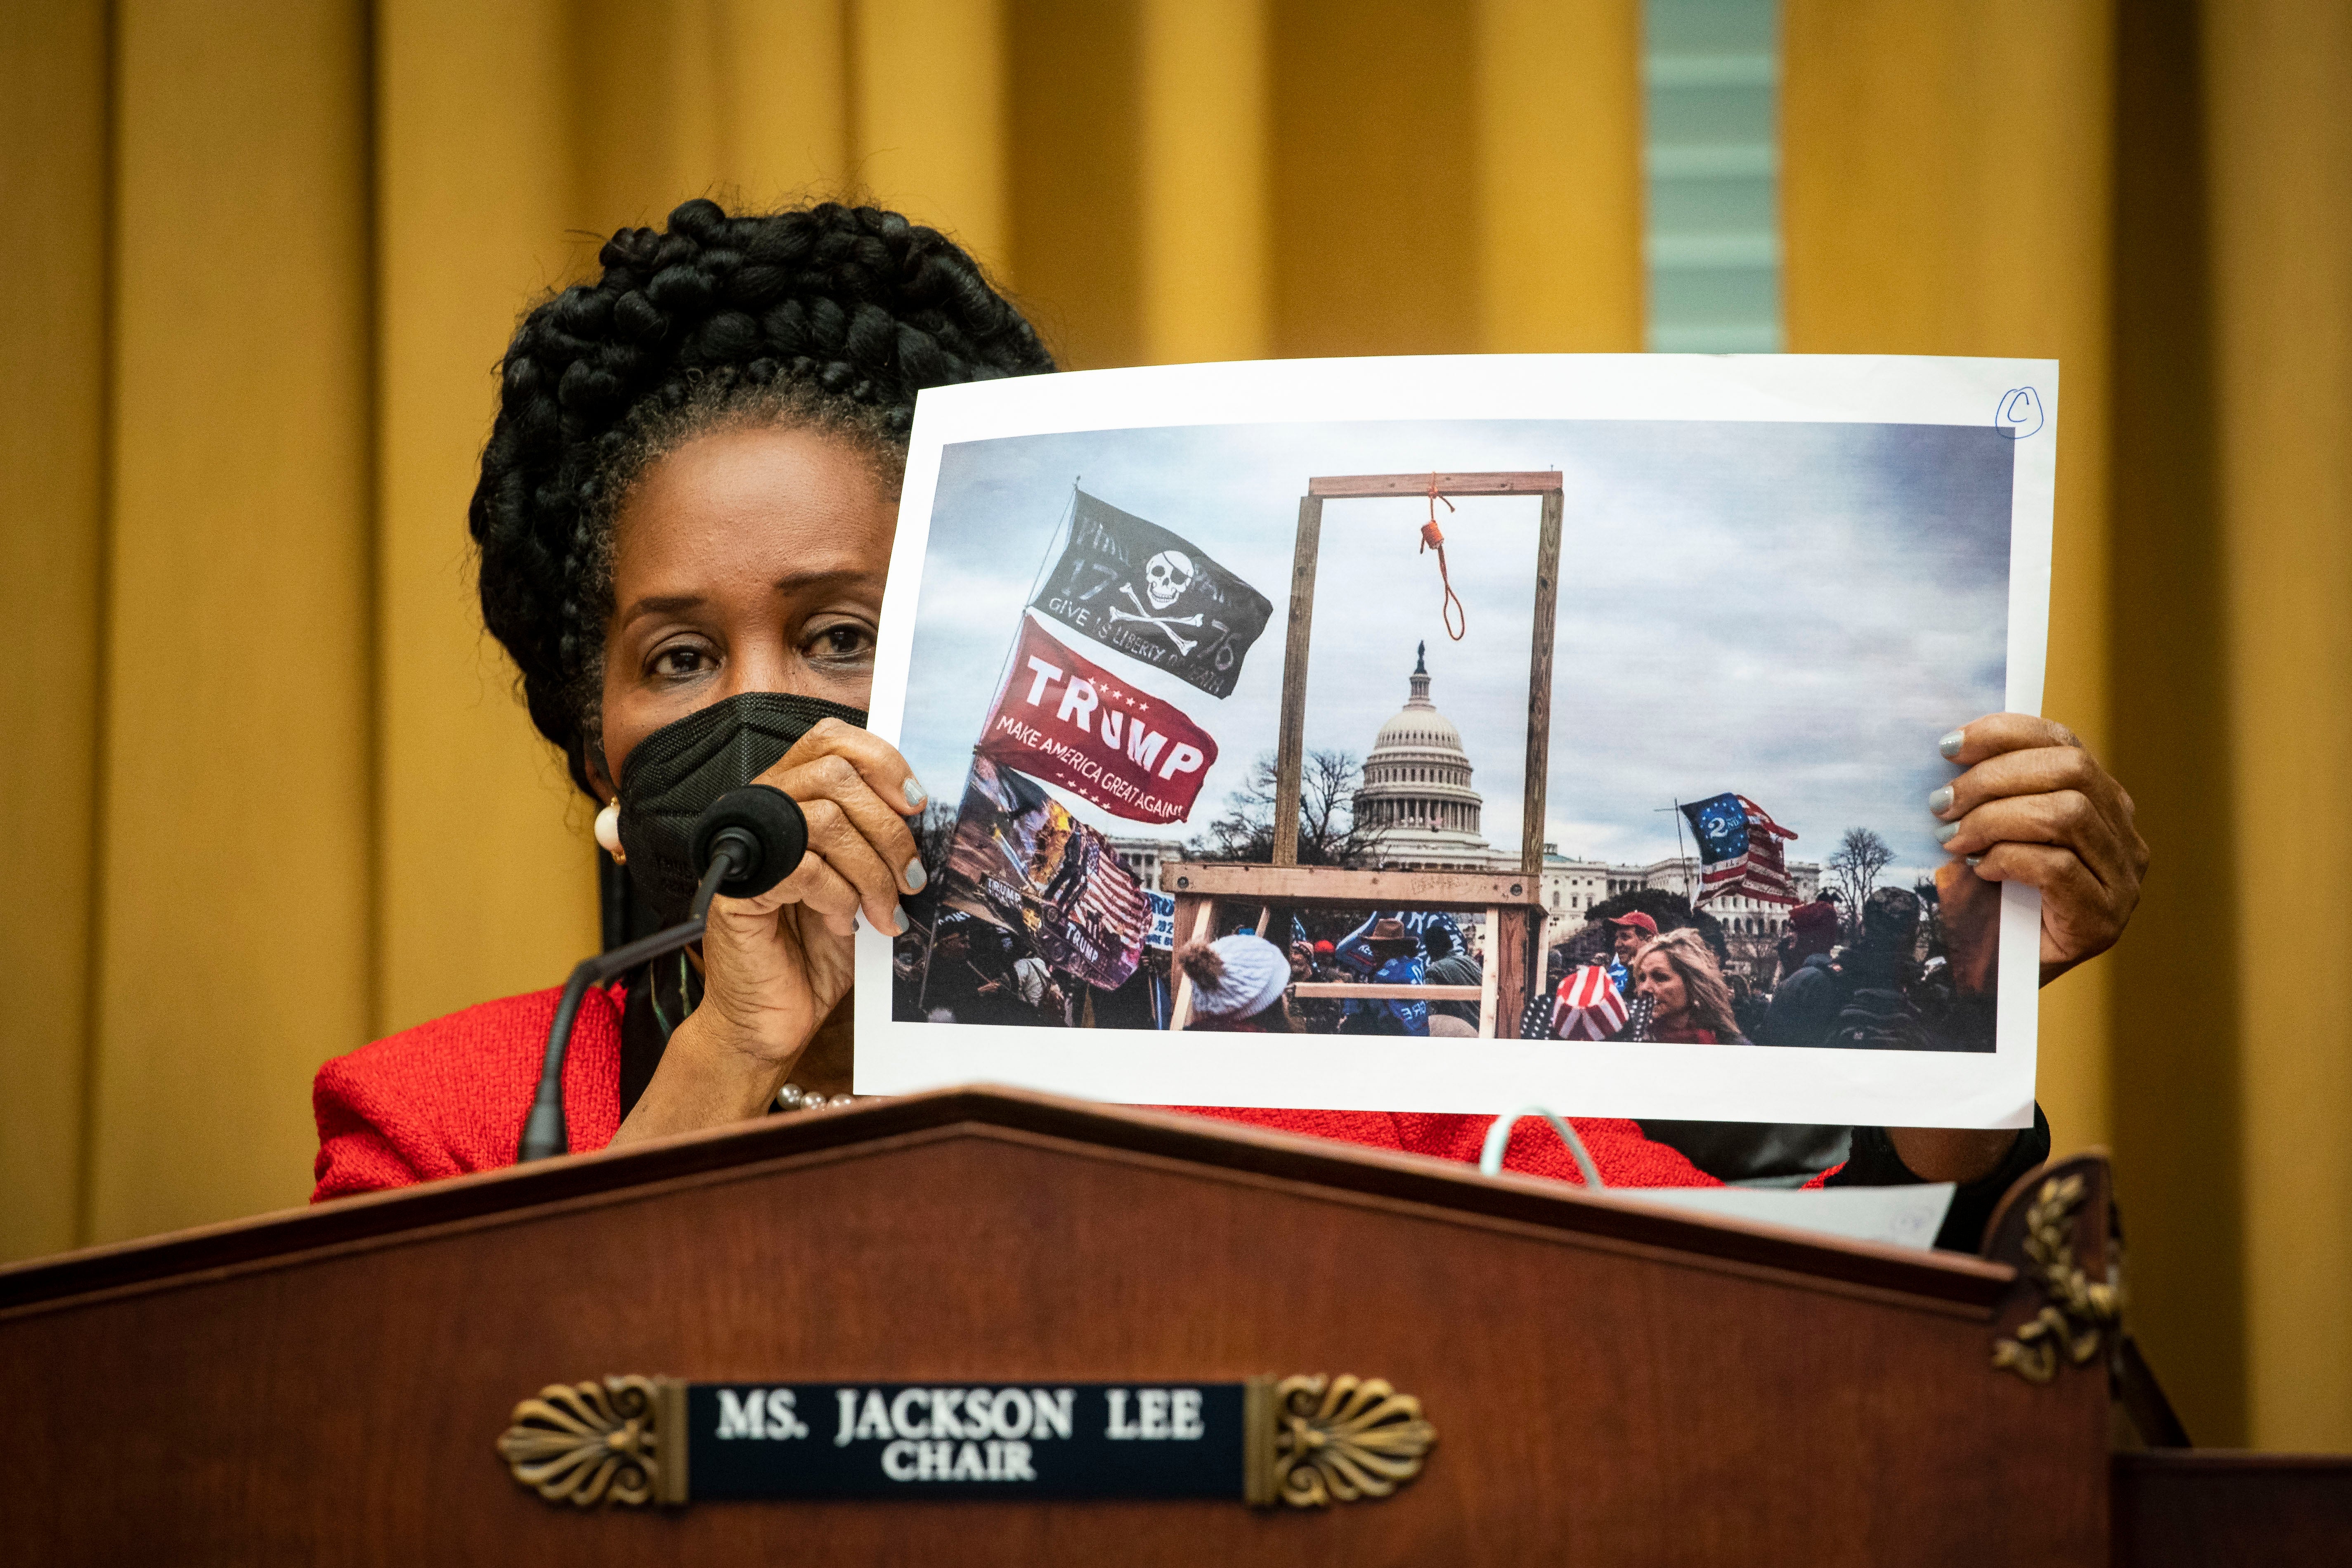 Sheila Jackson Lee holds a photo of the crowd at the 6 January insurrection during a House committee hearing on 24 February.